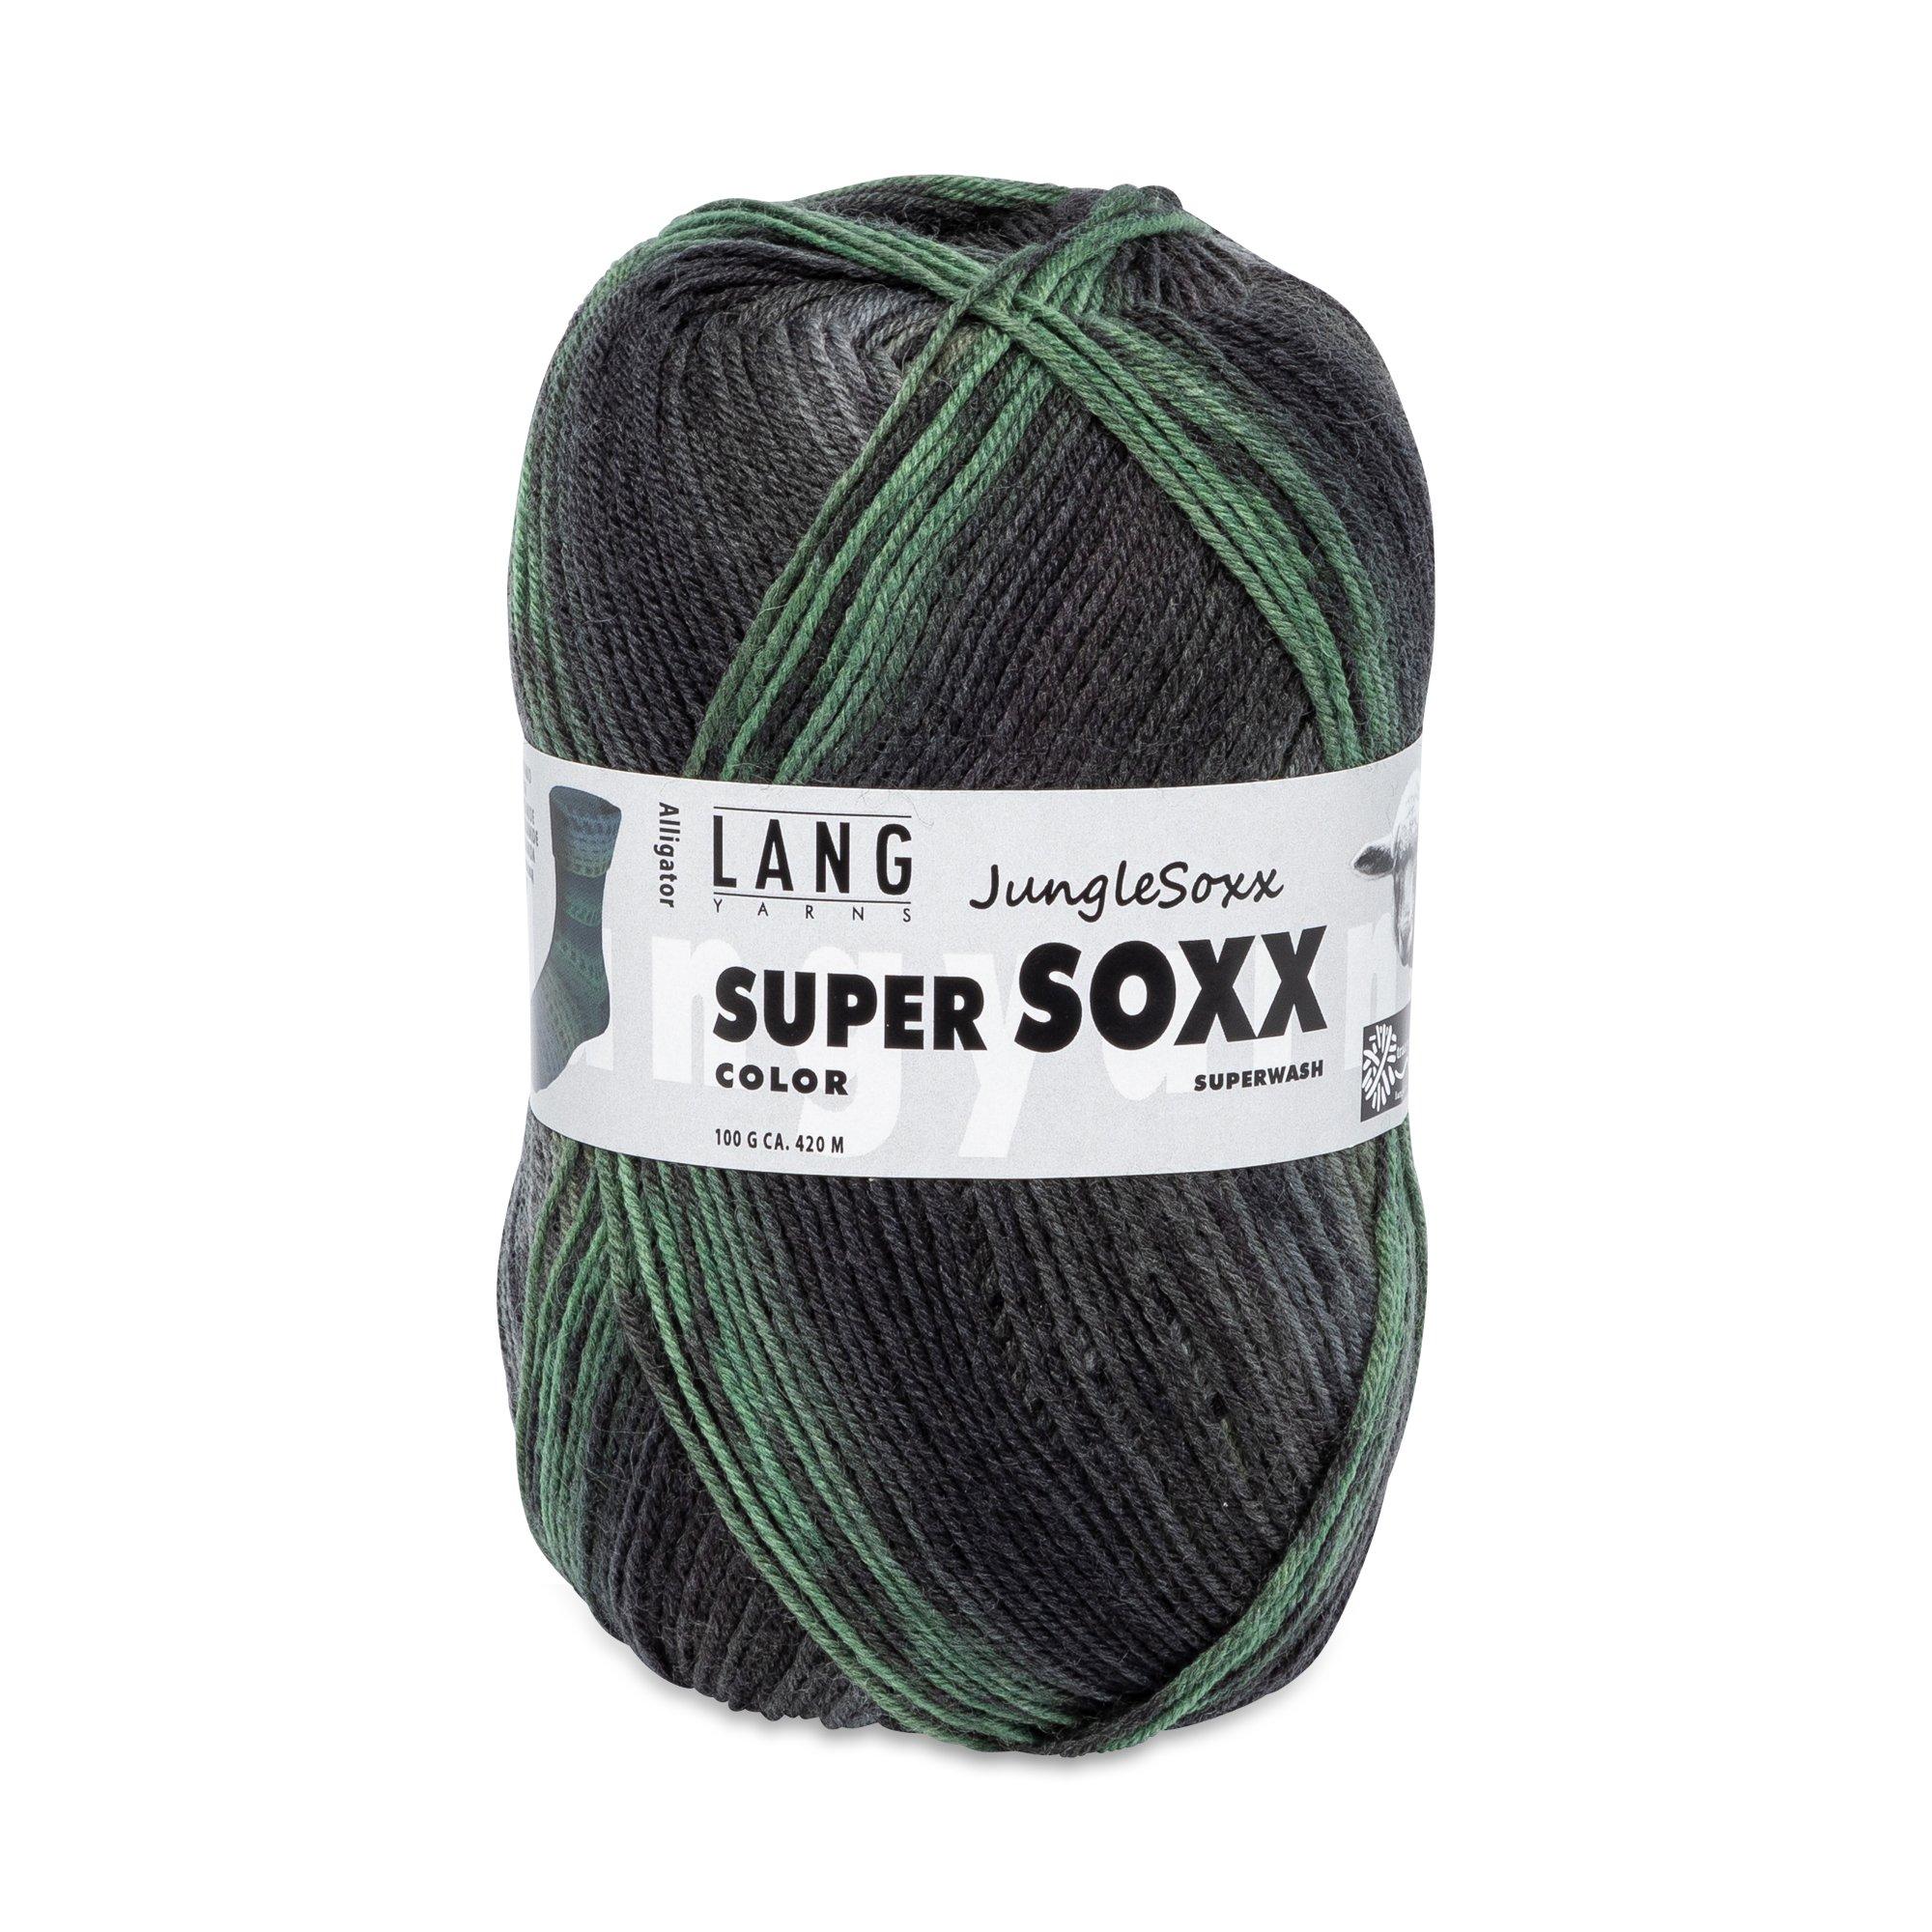 Manor Sockenwolle SUPER SOXX COLOR JungelSoxx 